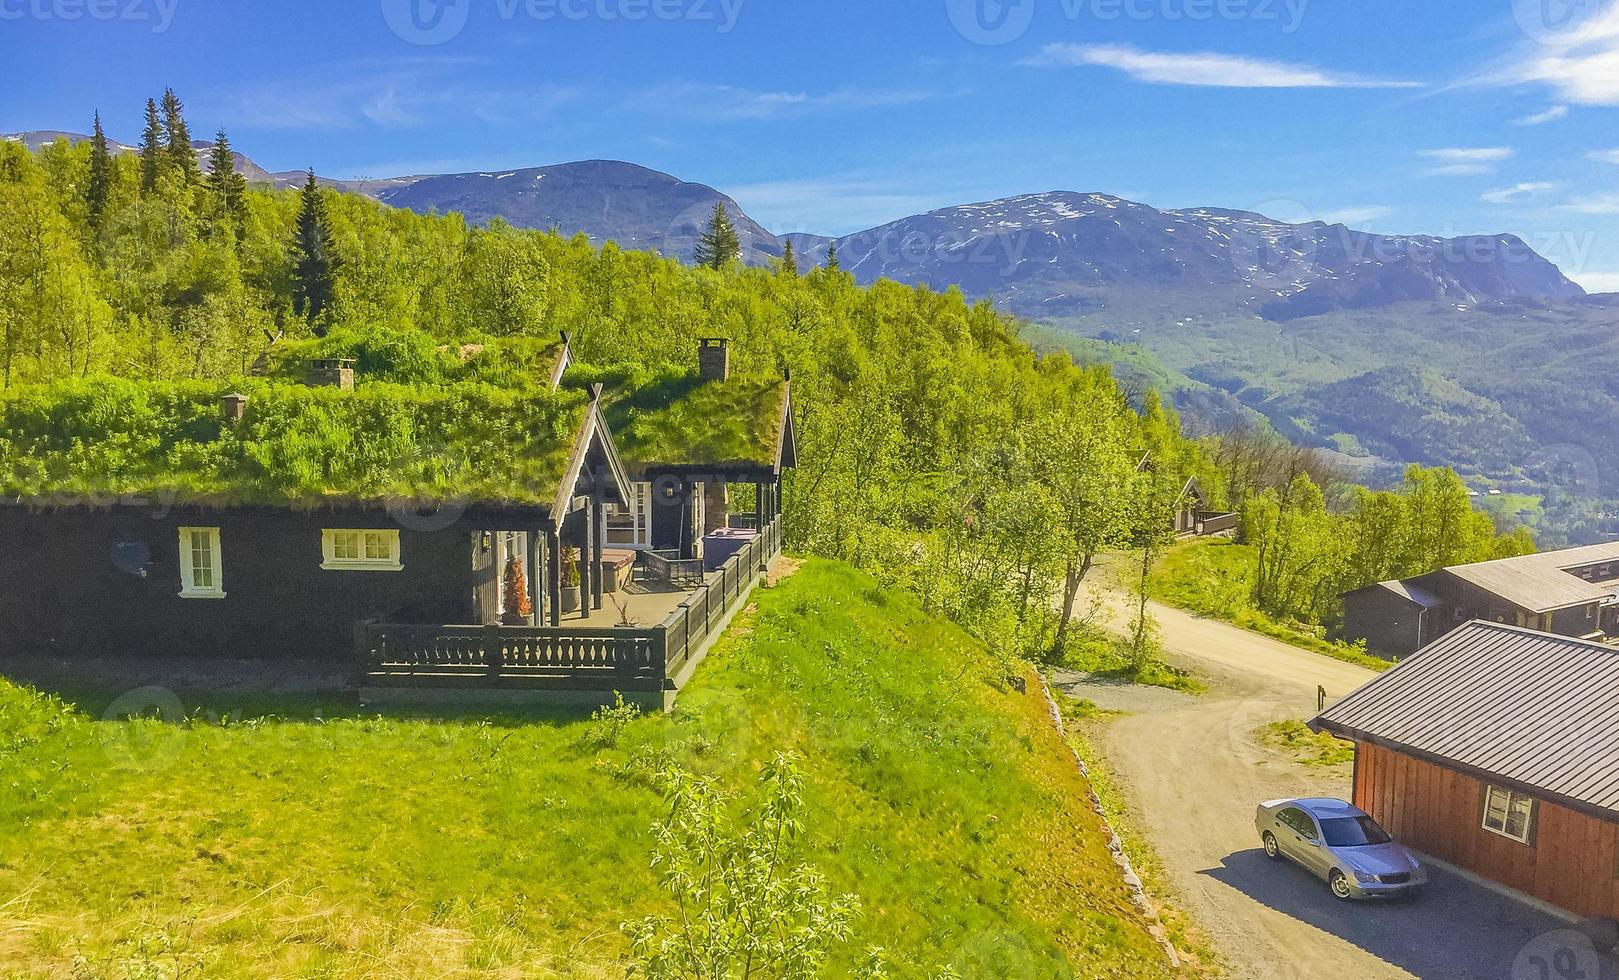 Beautiful panorama Norway Hemsedal Skicenter with Mountains cabin and huts. photo